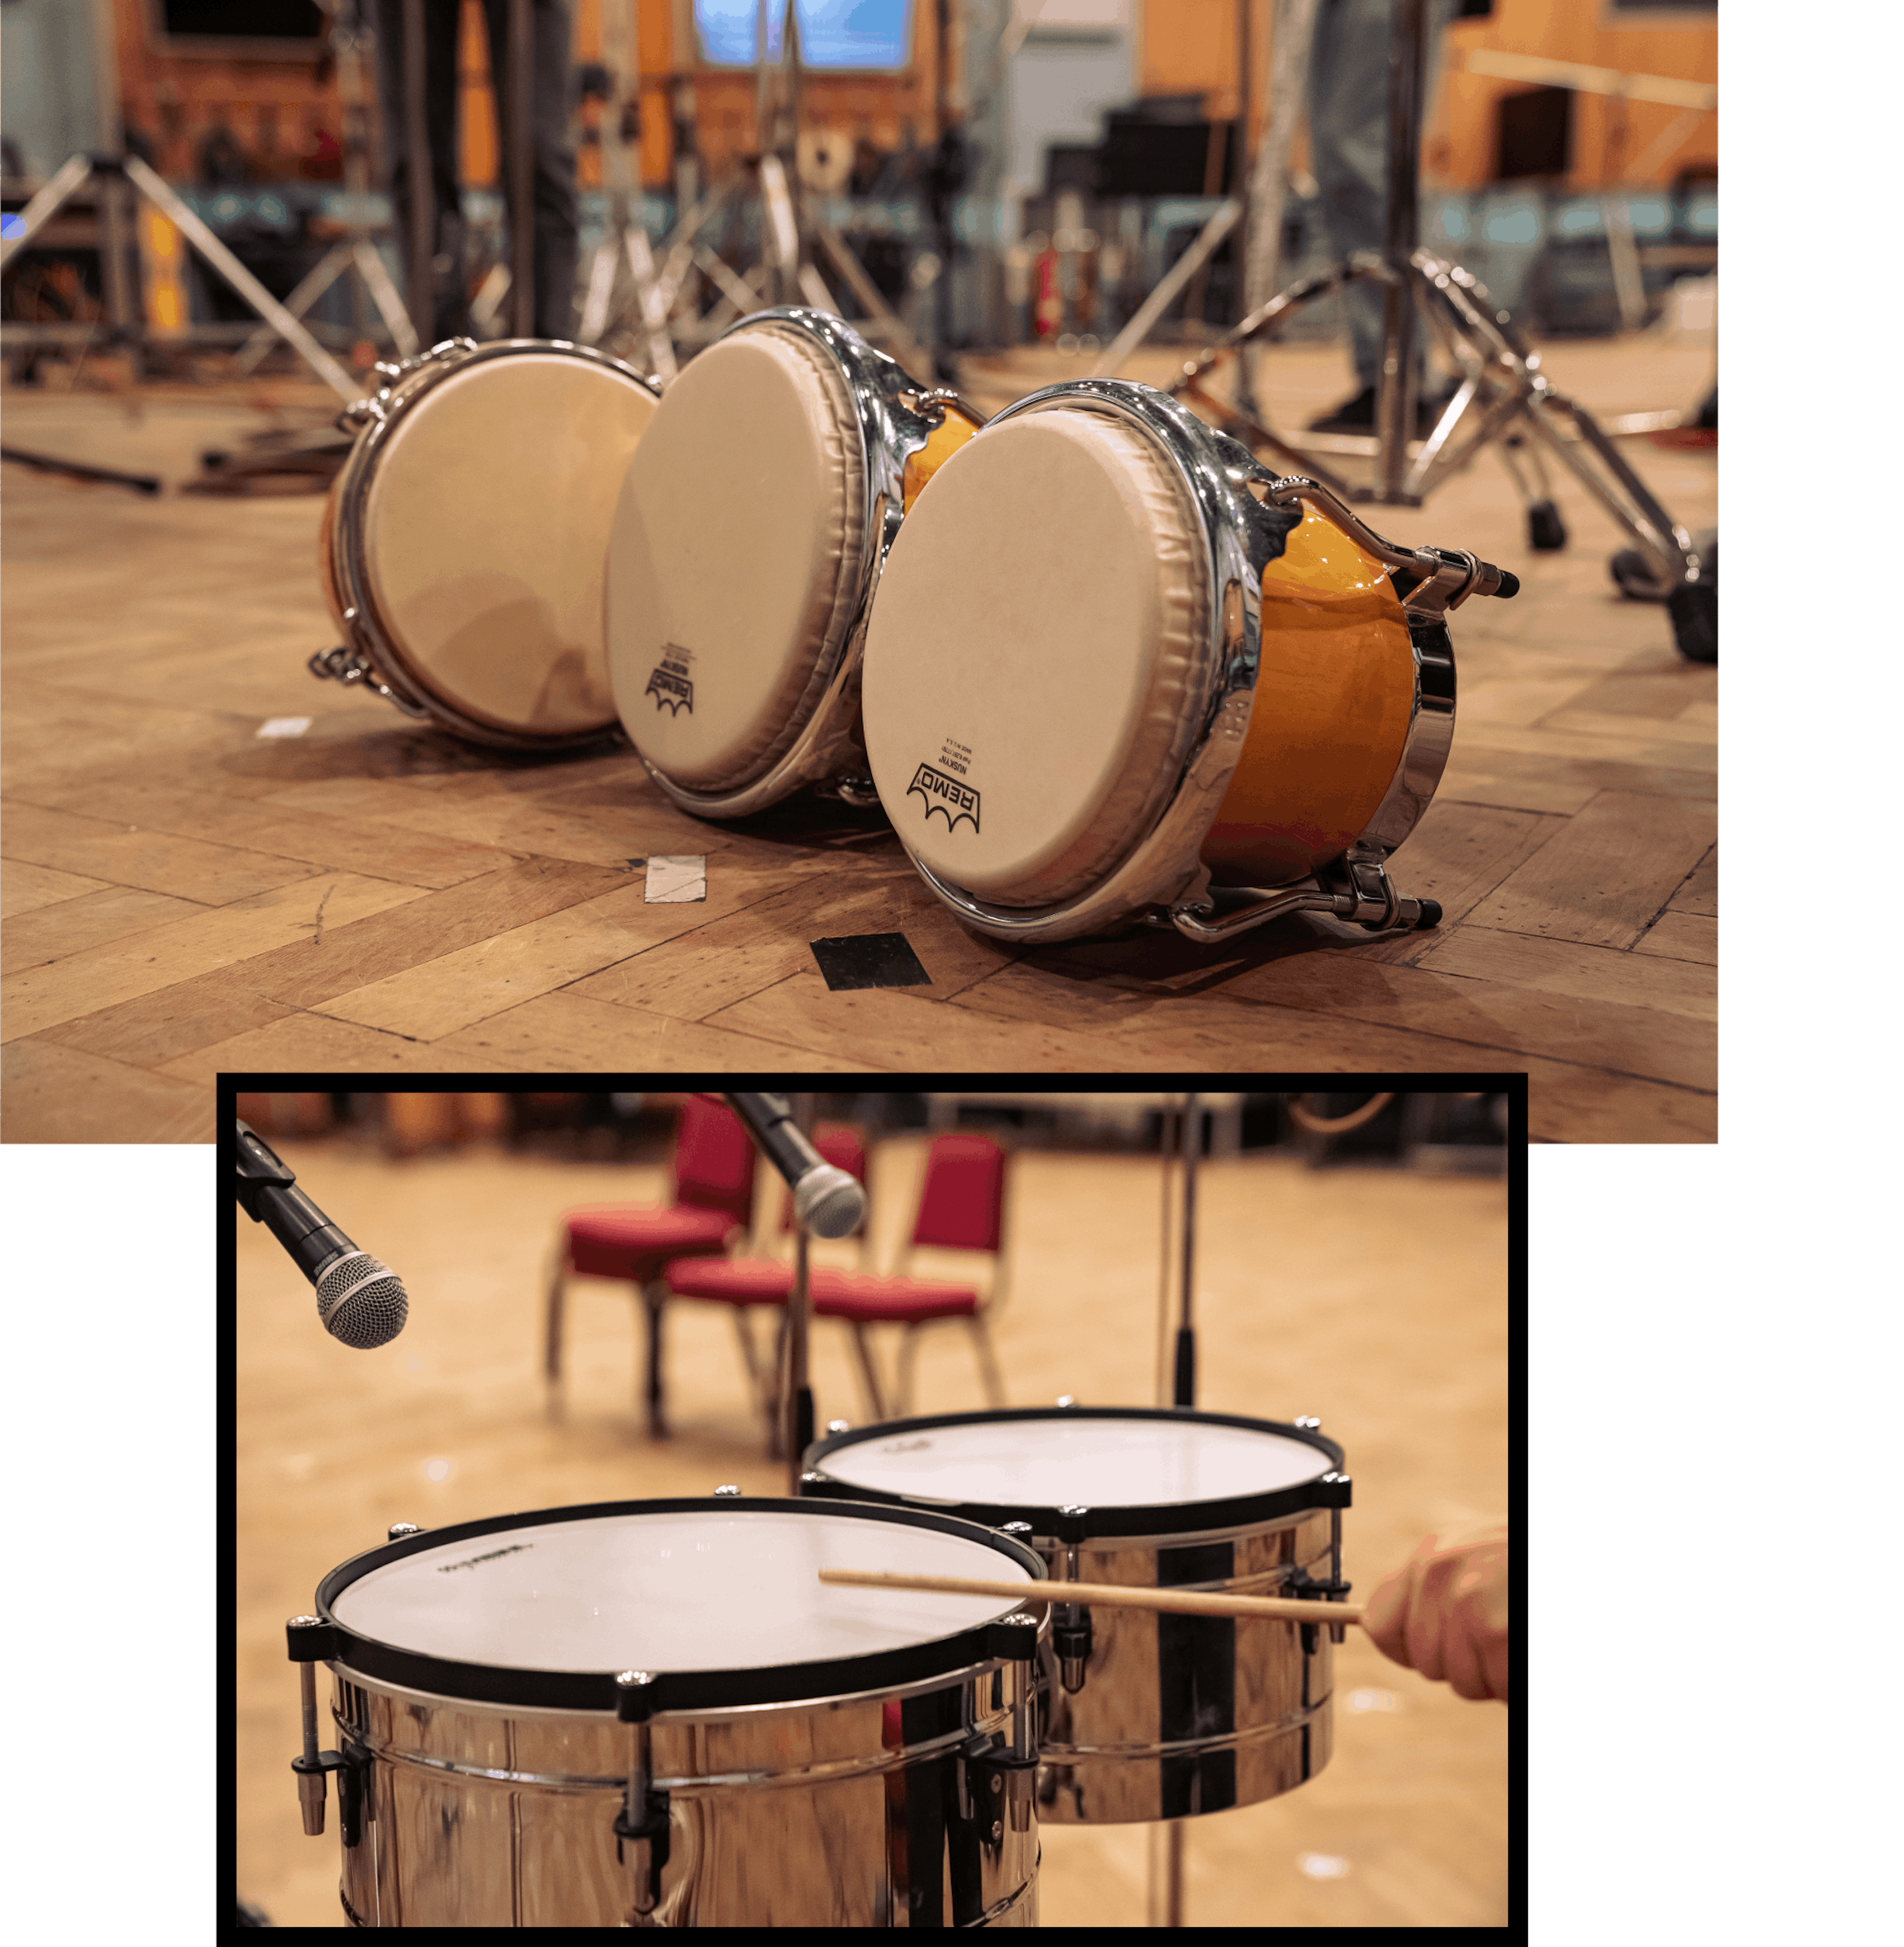 Various percussion instruments